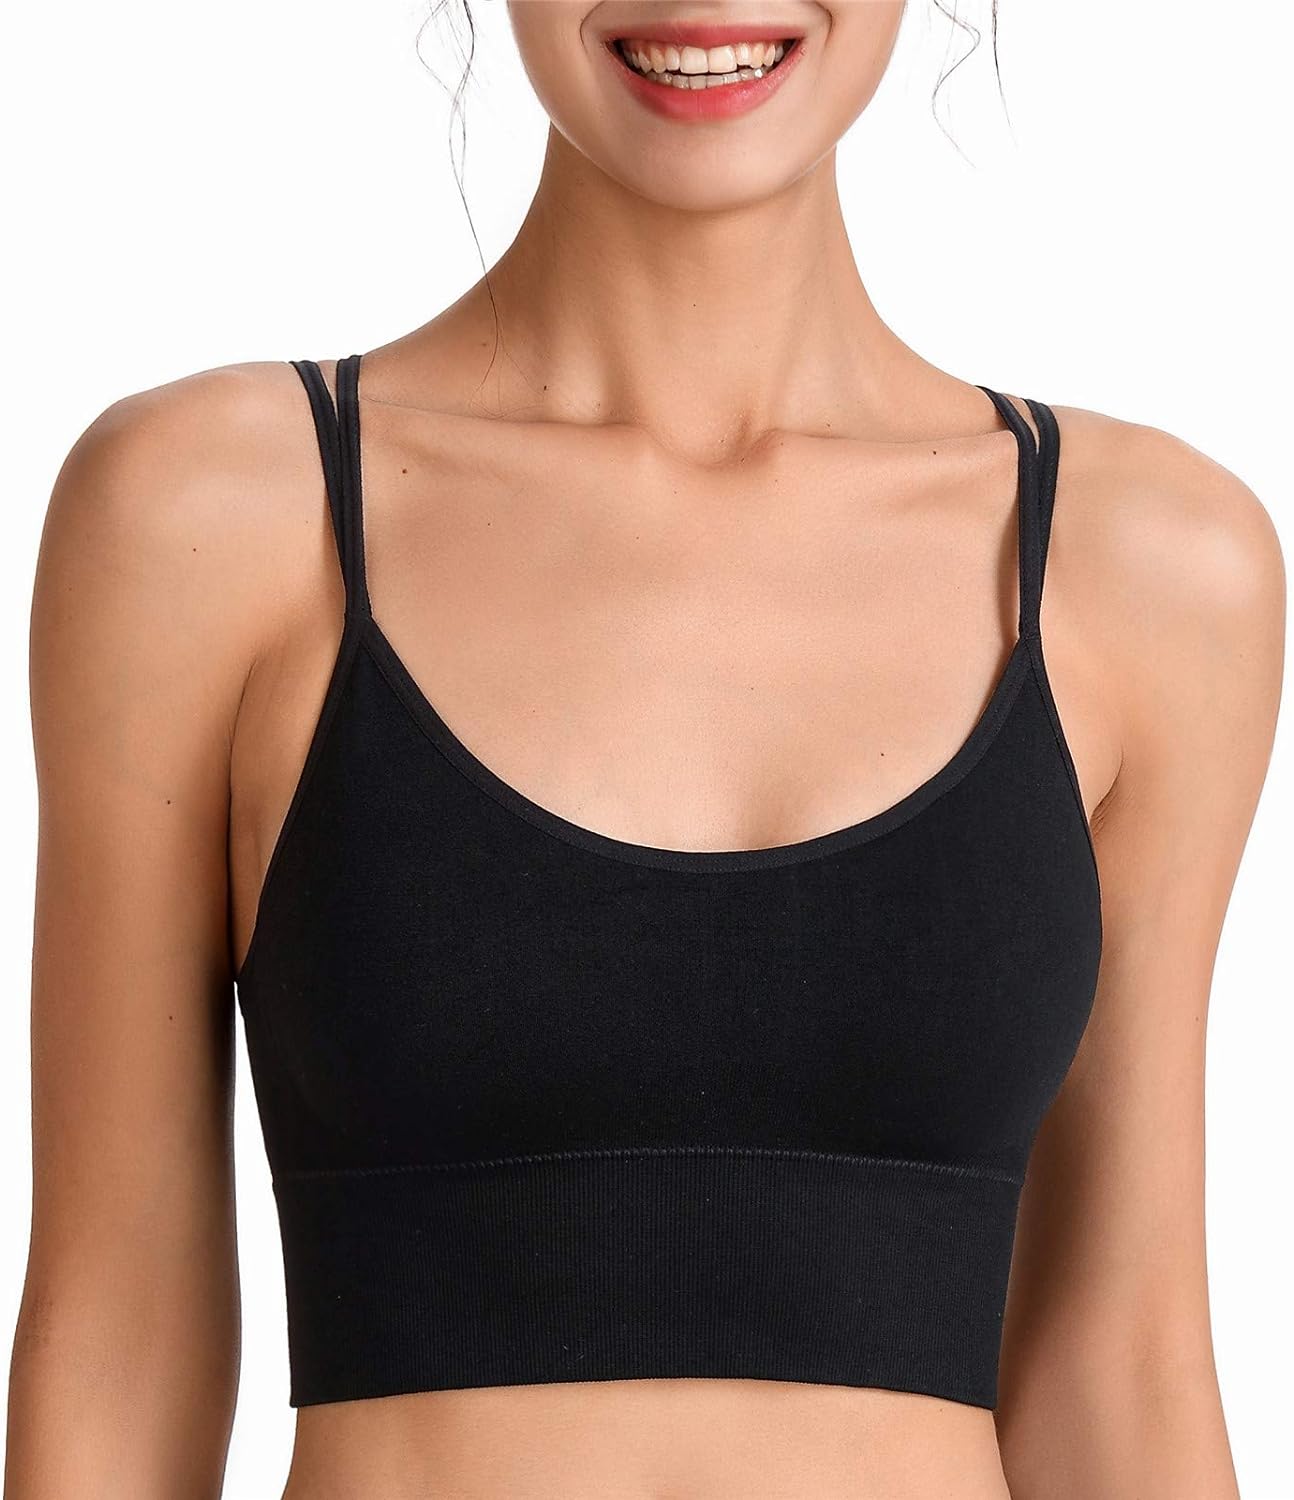 sotrong womens sports bra review